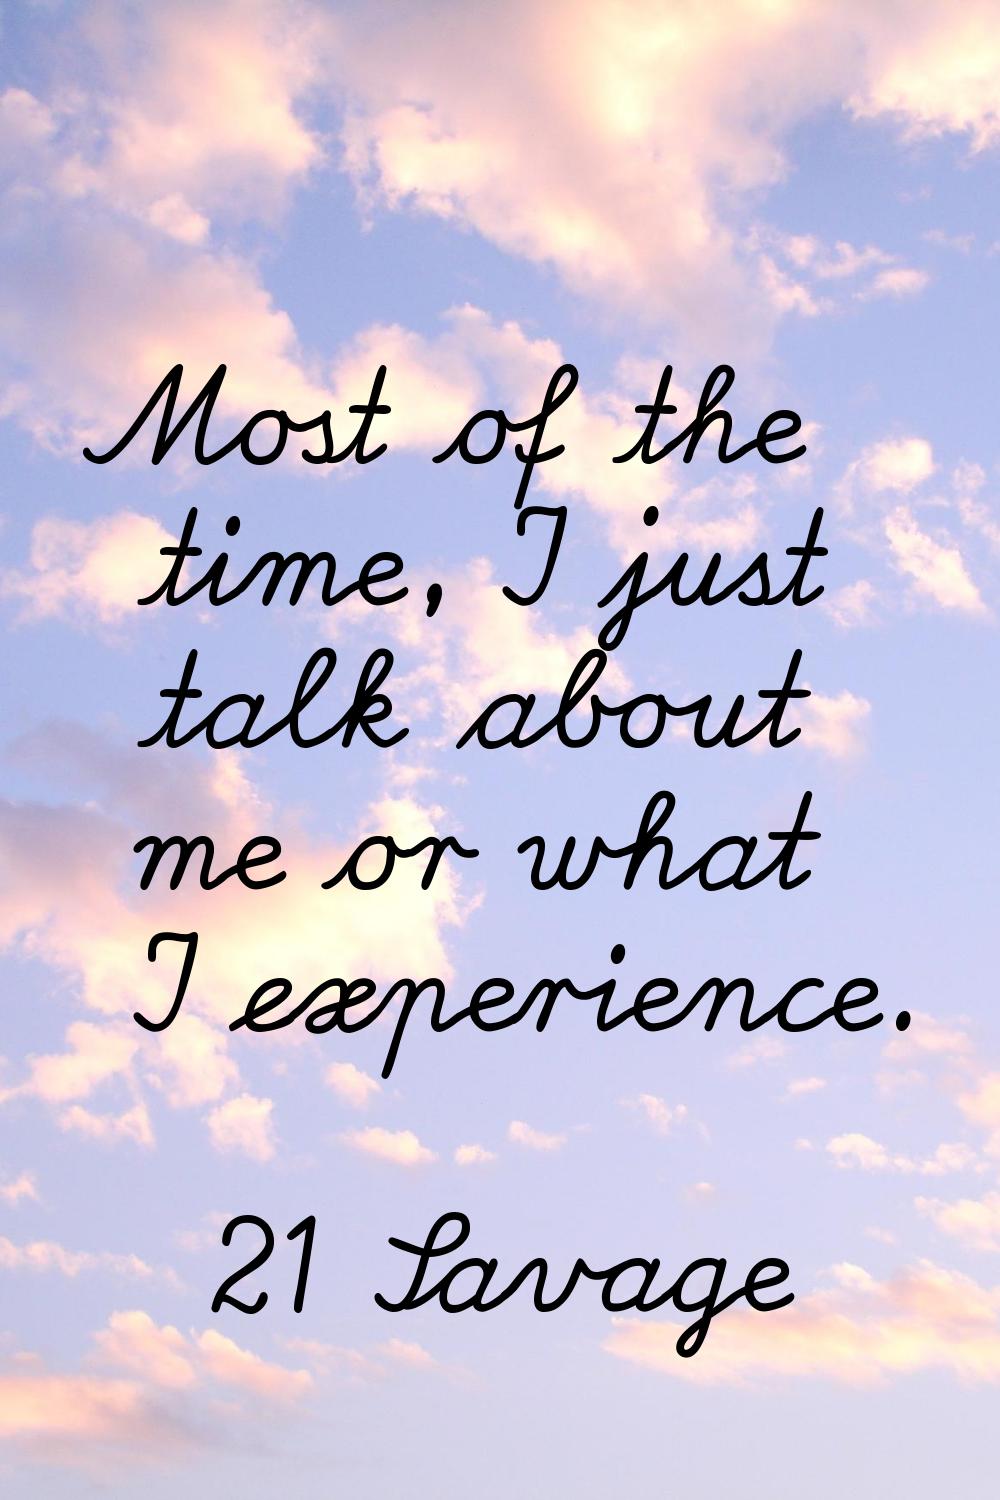 Most of the time, I just talk about me or what I experience.